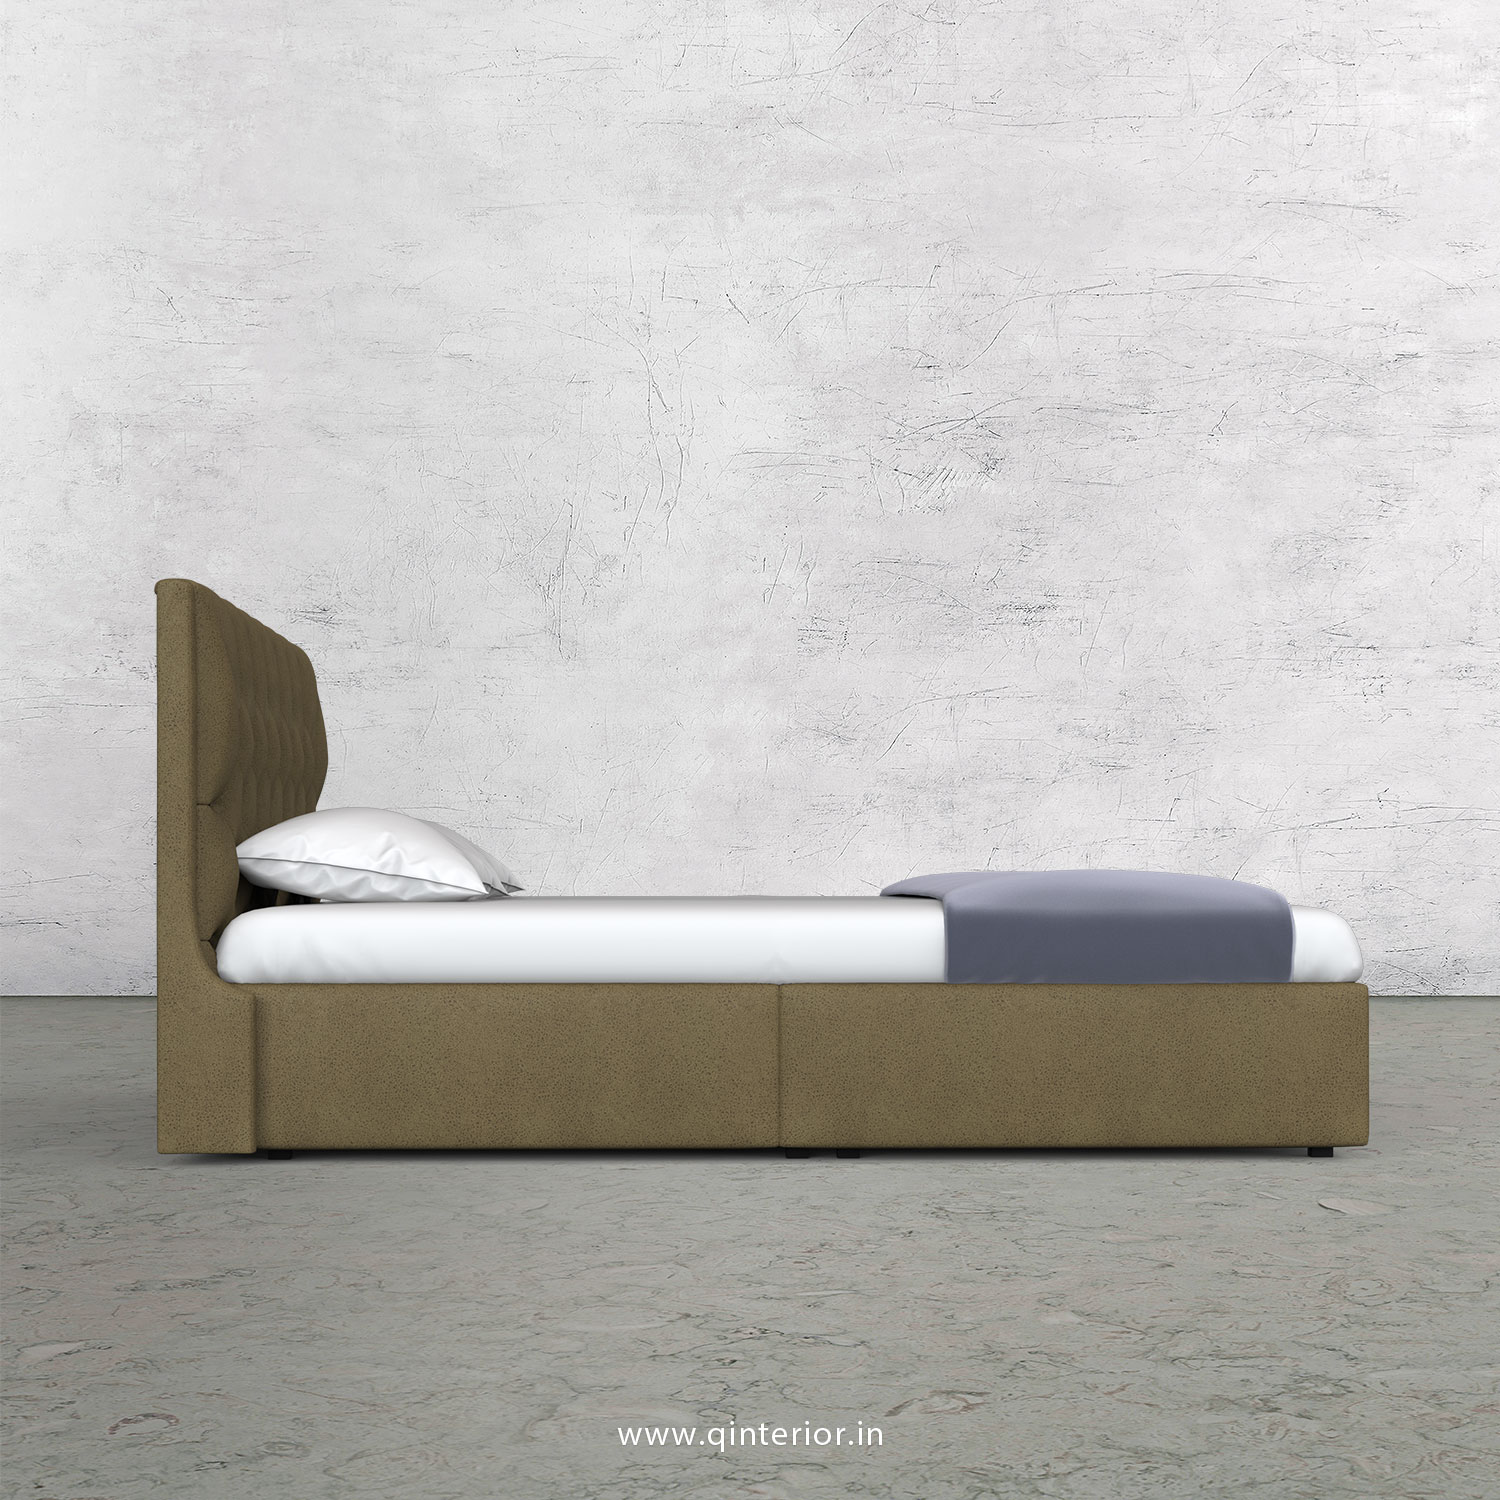 Scorpius King Size Bed in Fab Leather Fabric - KBD009 FL01